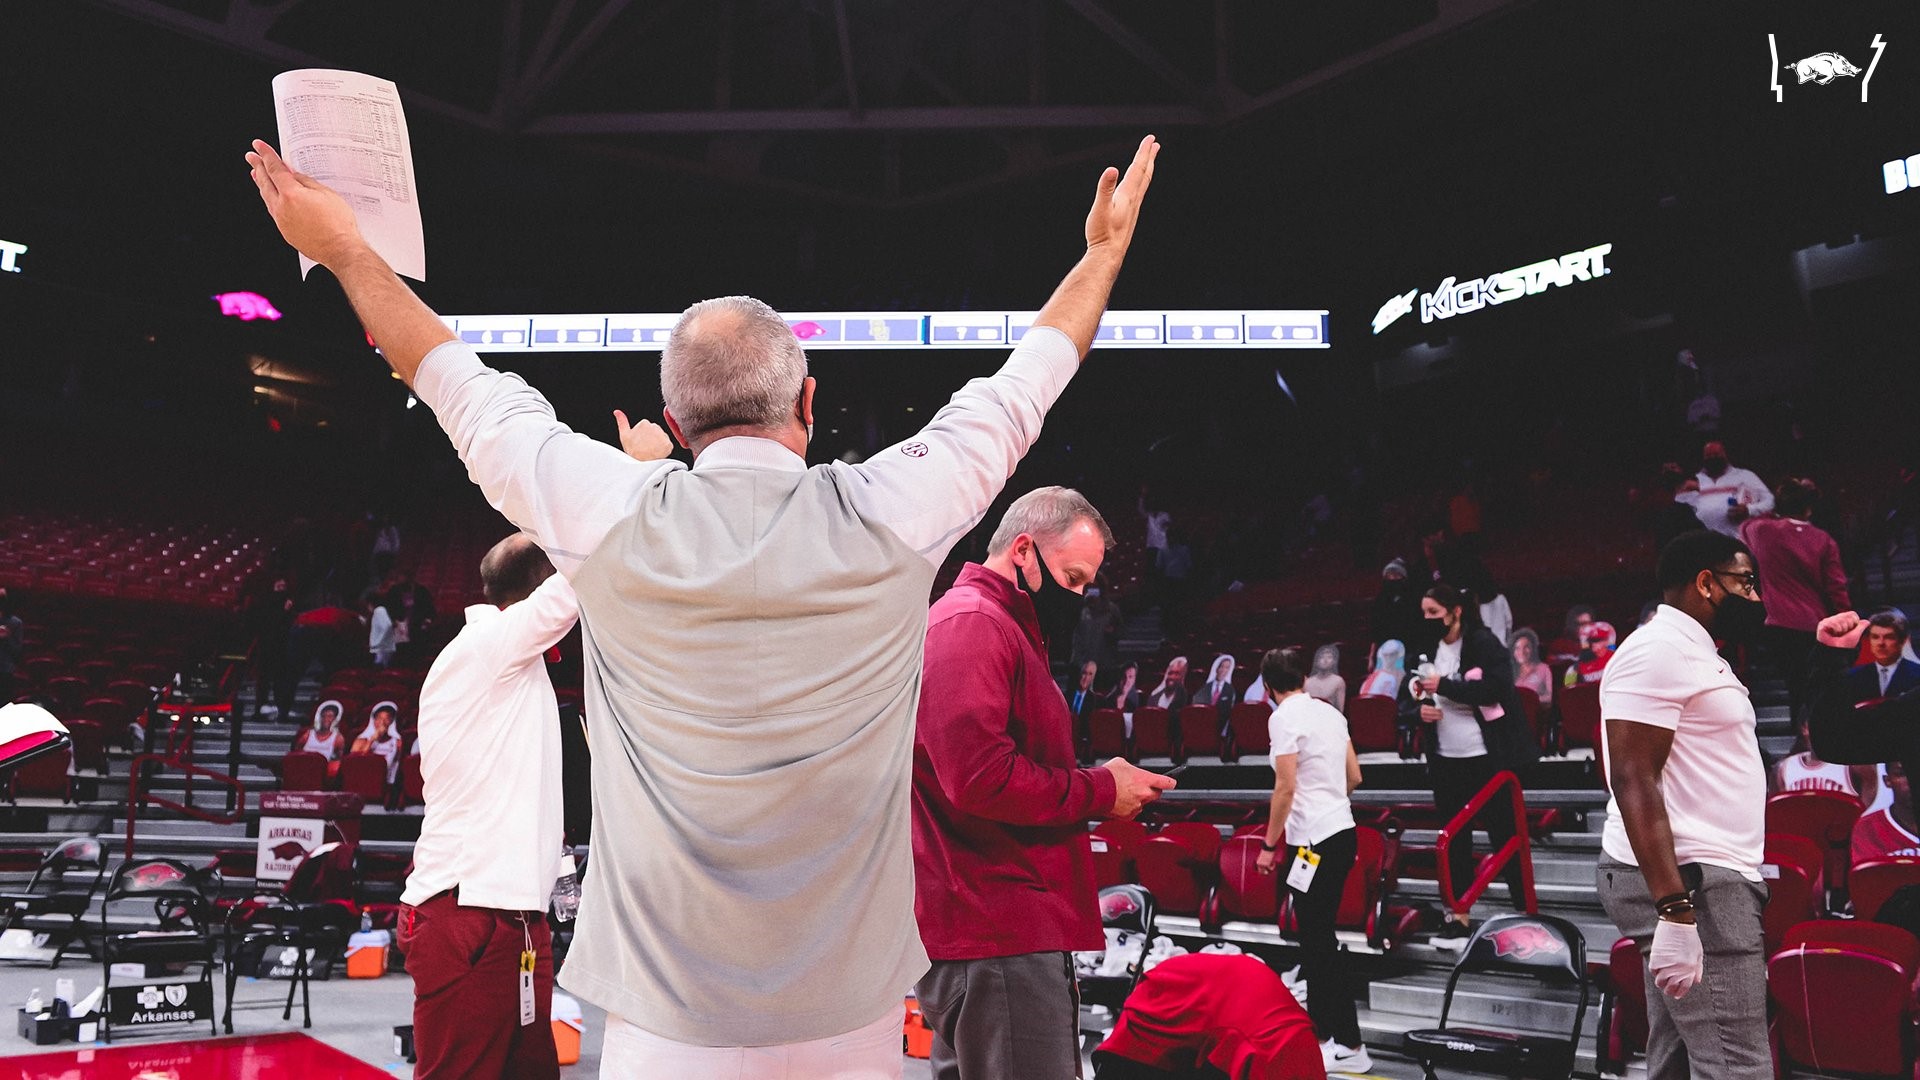 Arkansas earned a No. 4 seed and will face No. 13 Wright State Monday, March 21